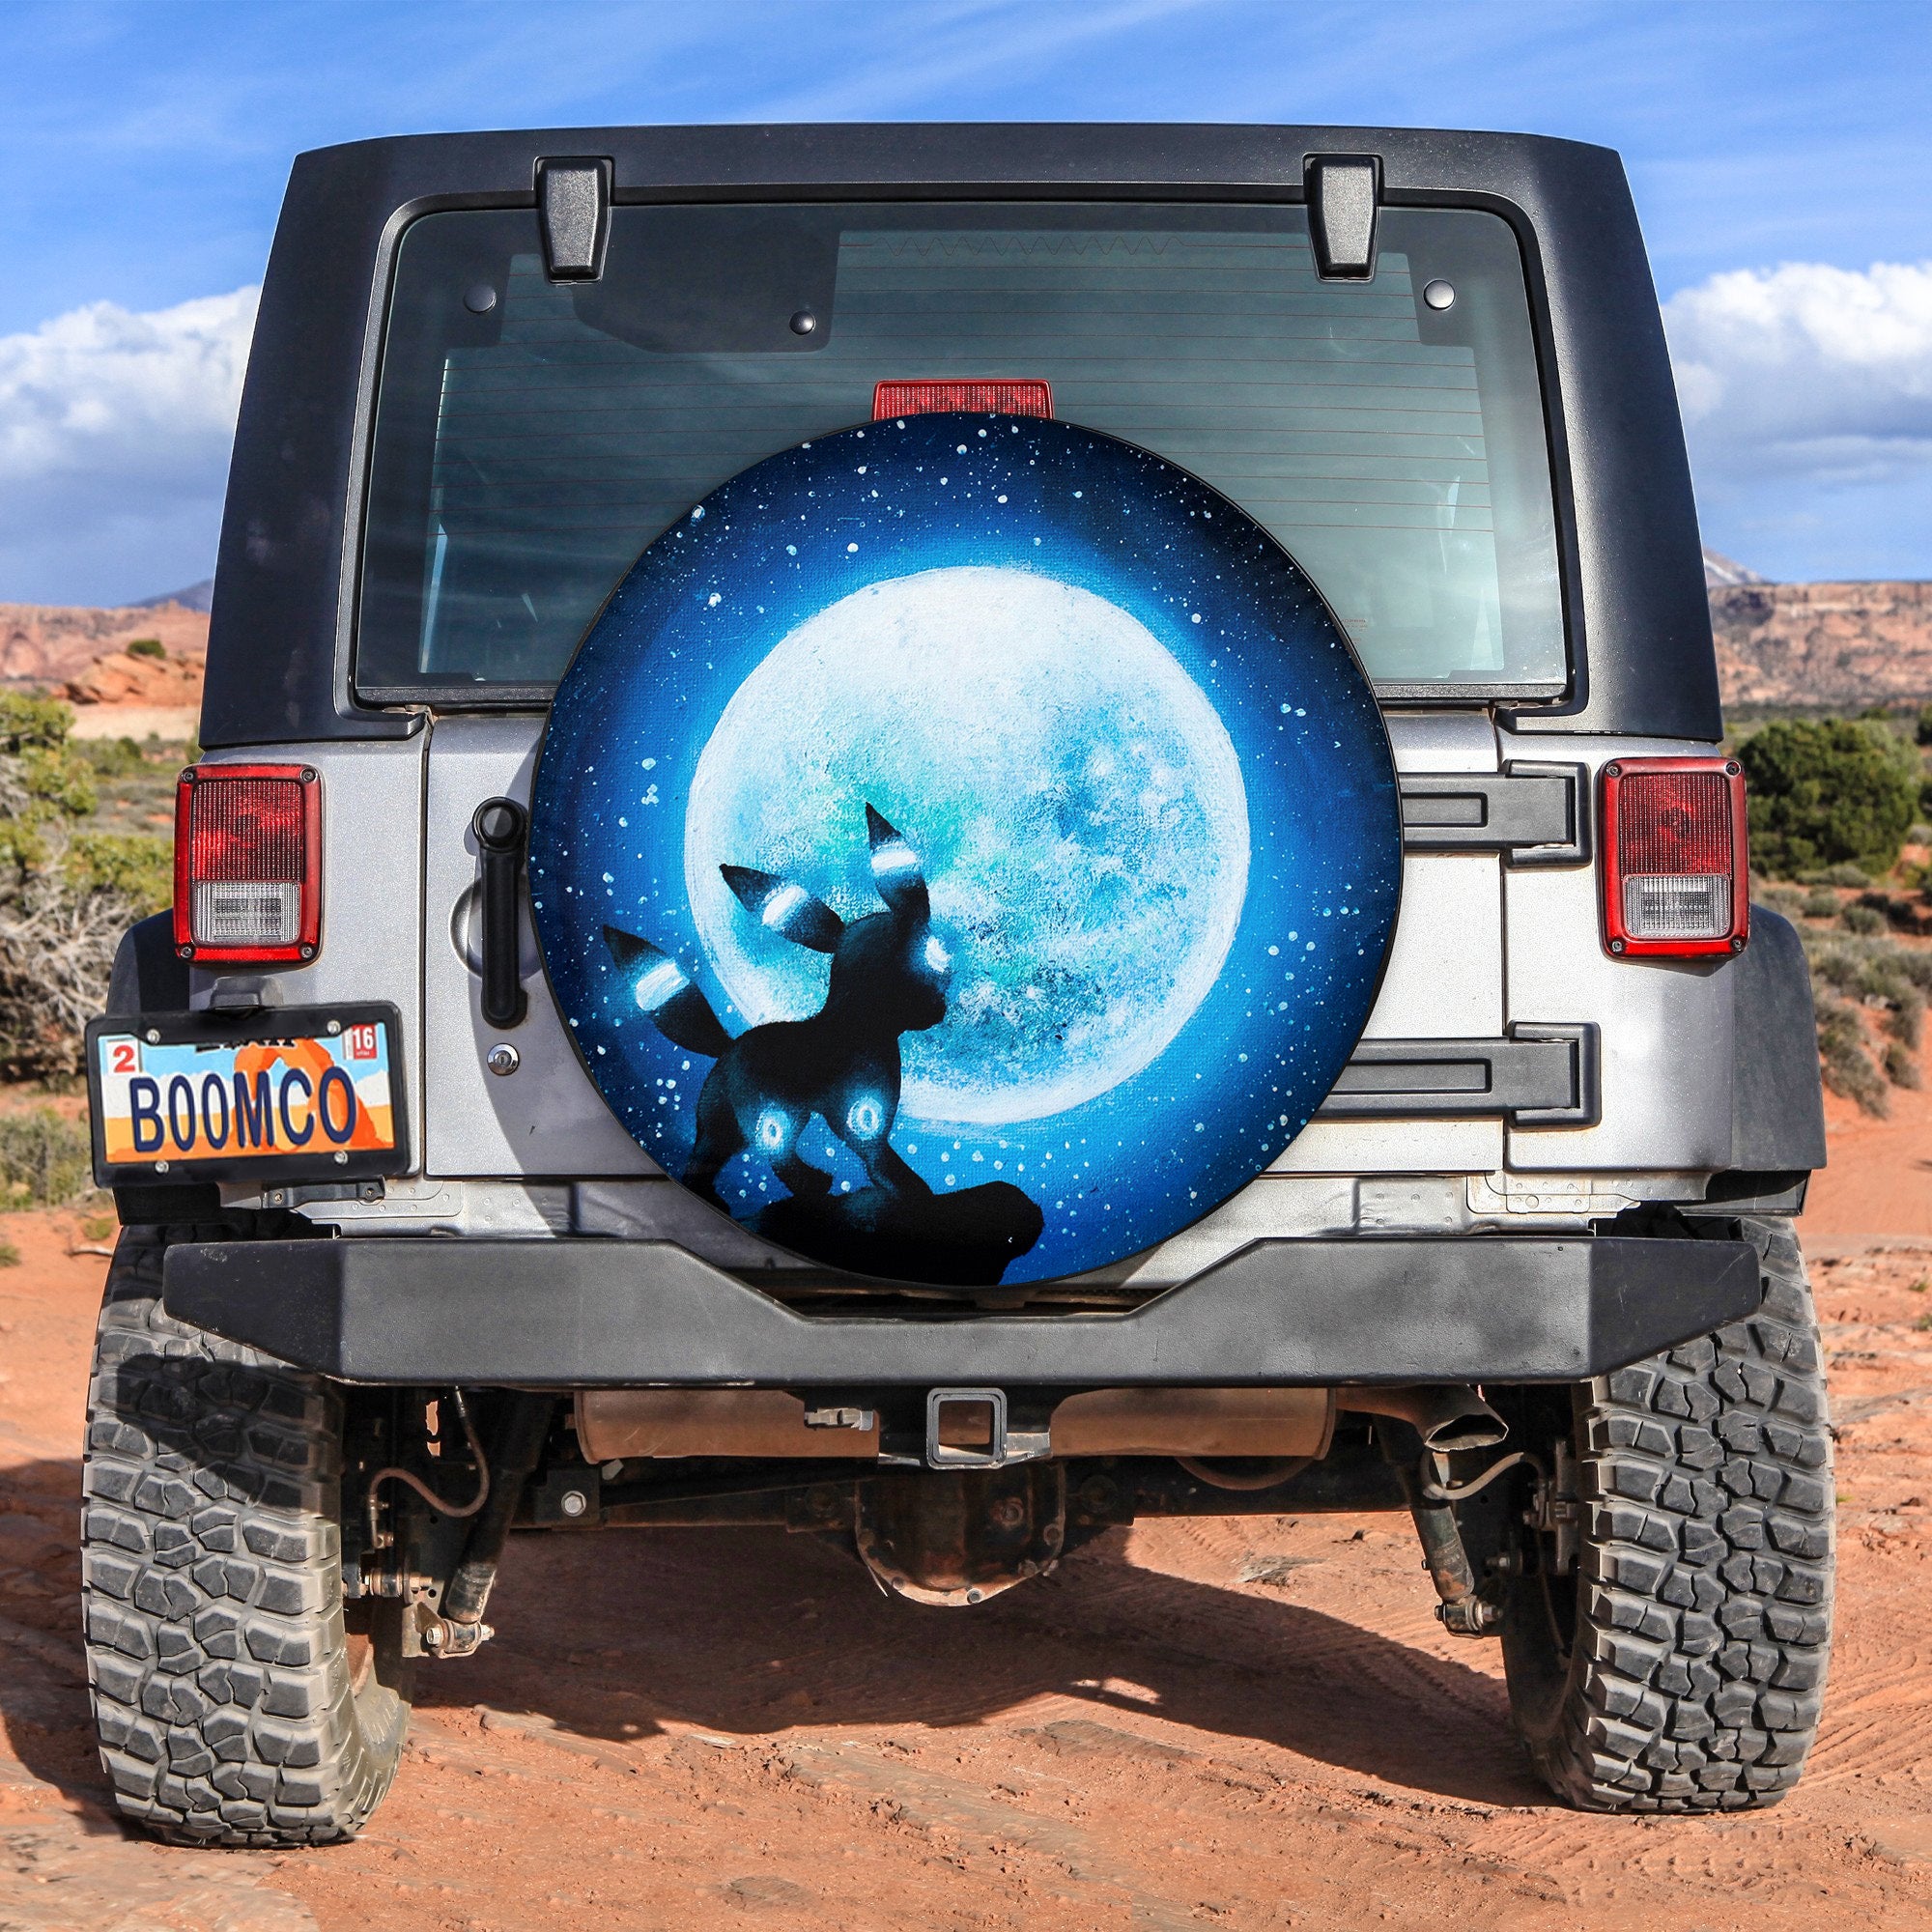 Pokemon Umbreon Moon Spare Tire Covers Gift For Campers Nearkii